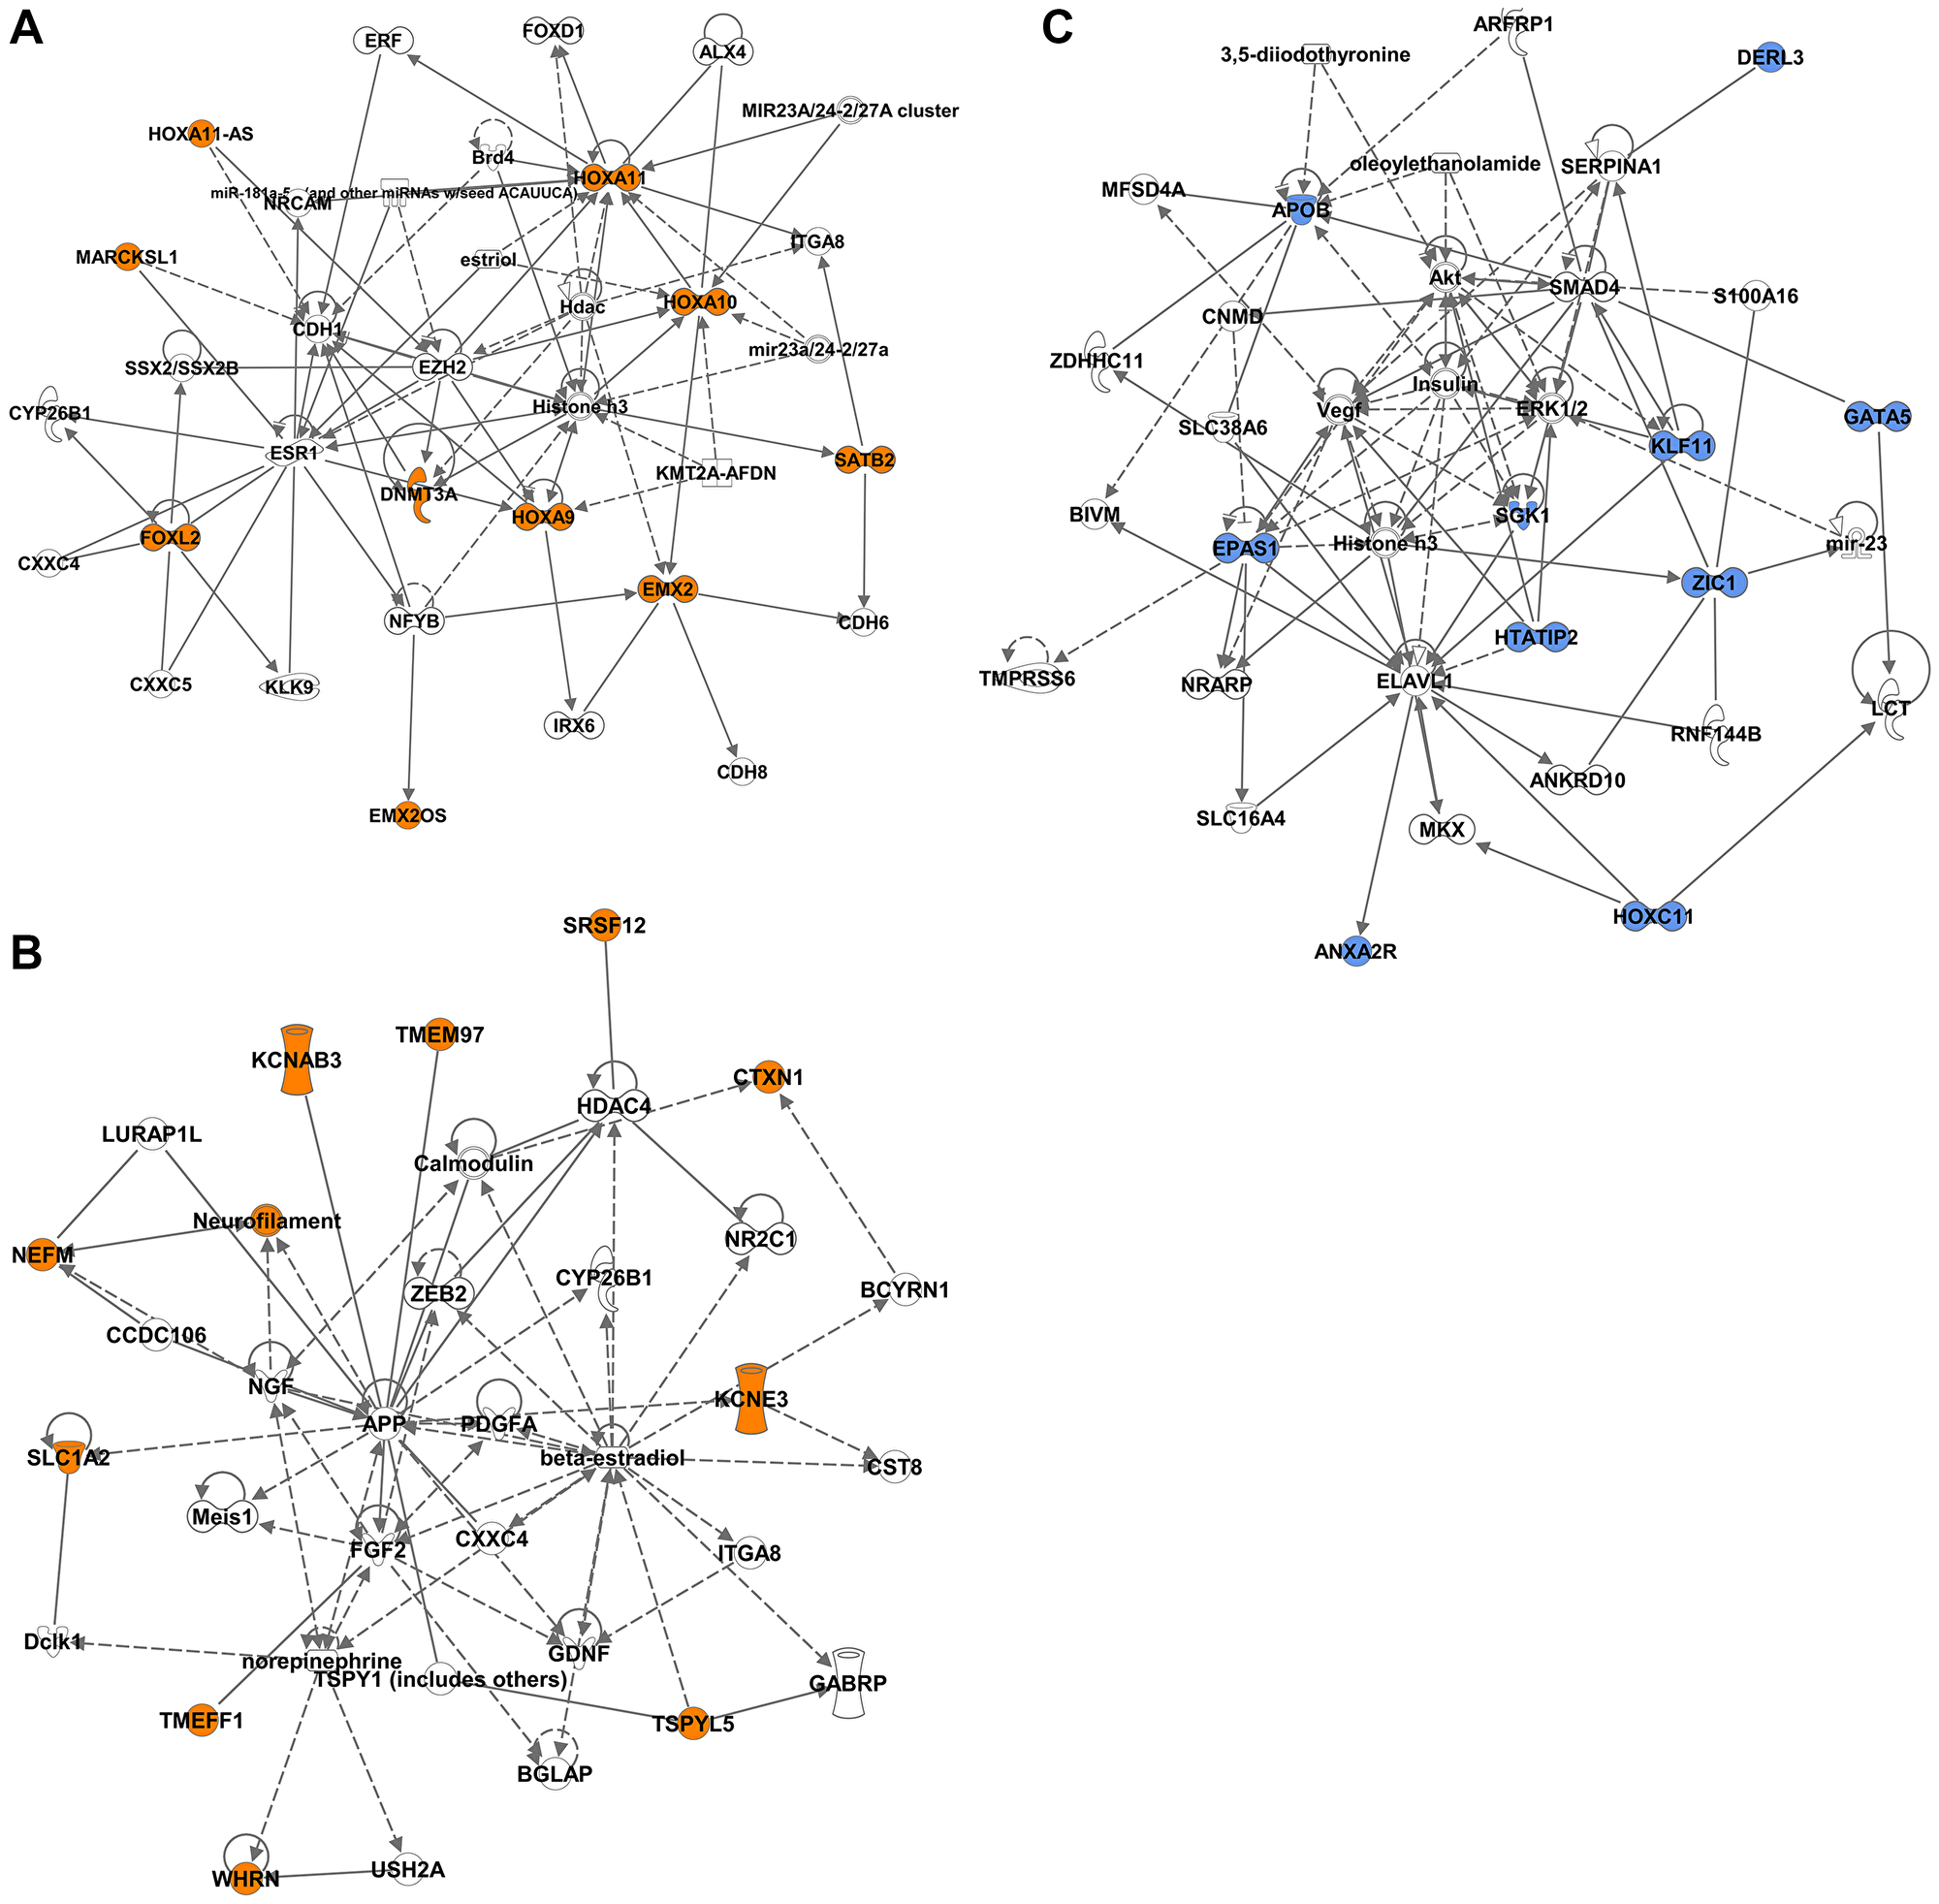 Figure 6: Network analysis of the DM-DEGs associated with STLMS-Hypermethylated-Downregulated and ULMS-Hypermethylated-Downregulated groups.